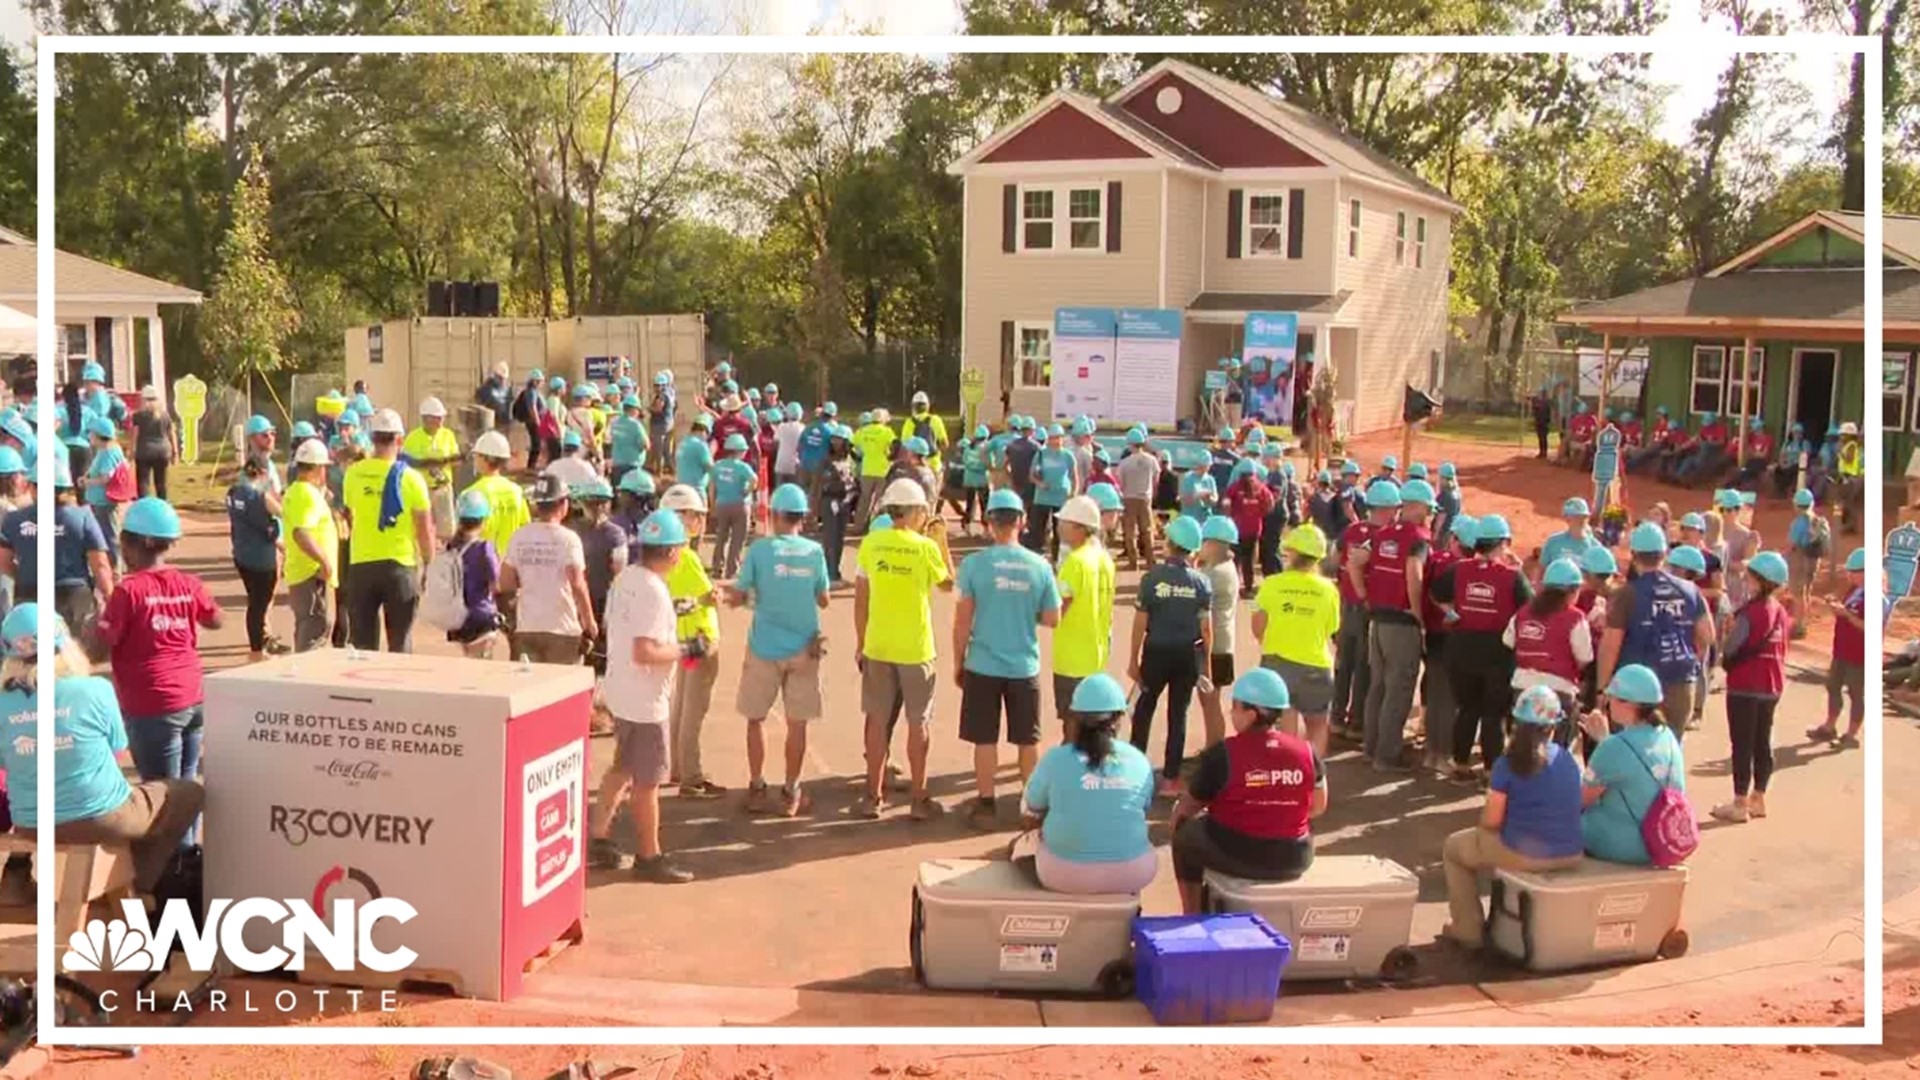 Thousands of volunteers came together this week to build 23 homes in west Charlotte as part of the Jimmy & Rosalynn Carter Work Project.